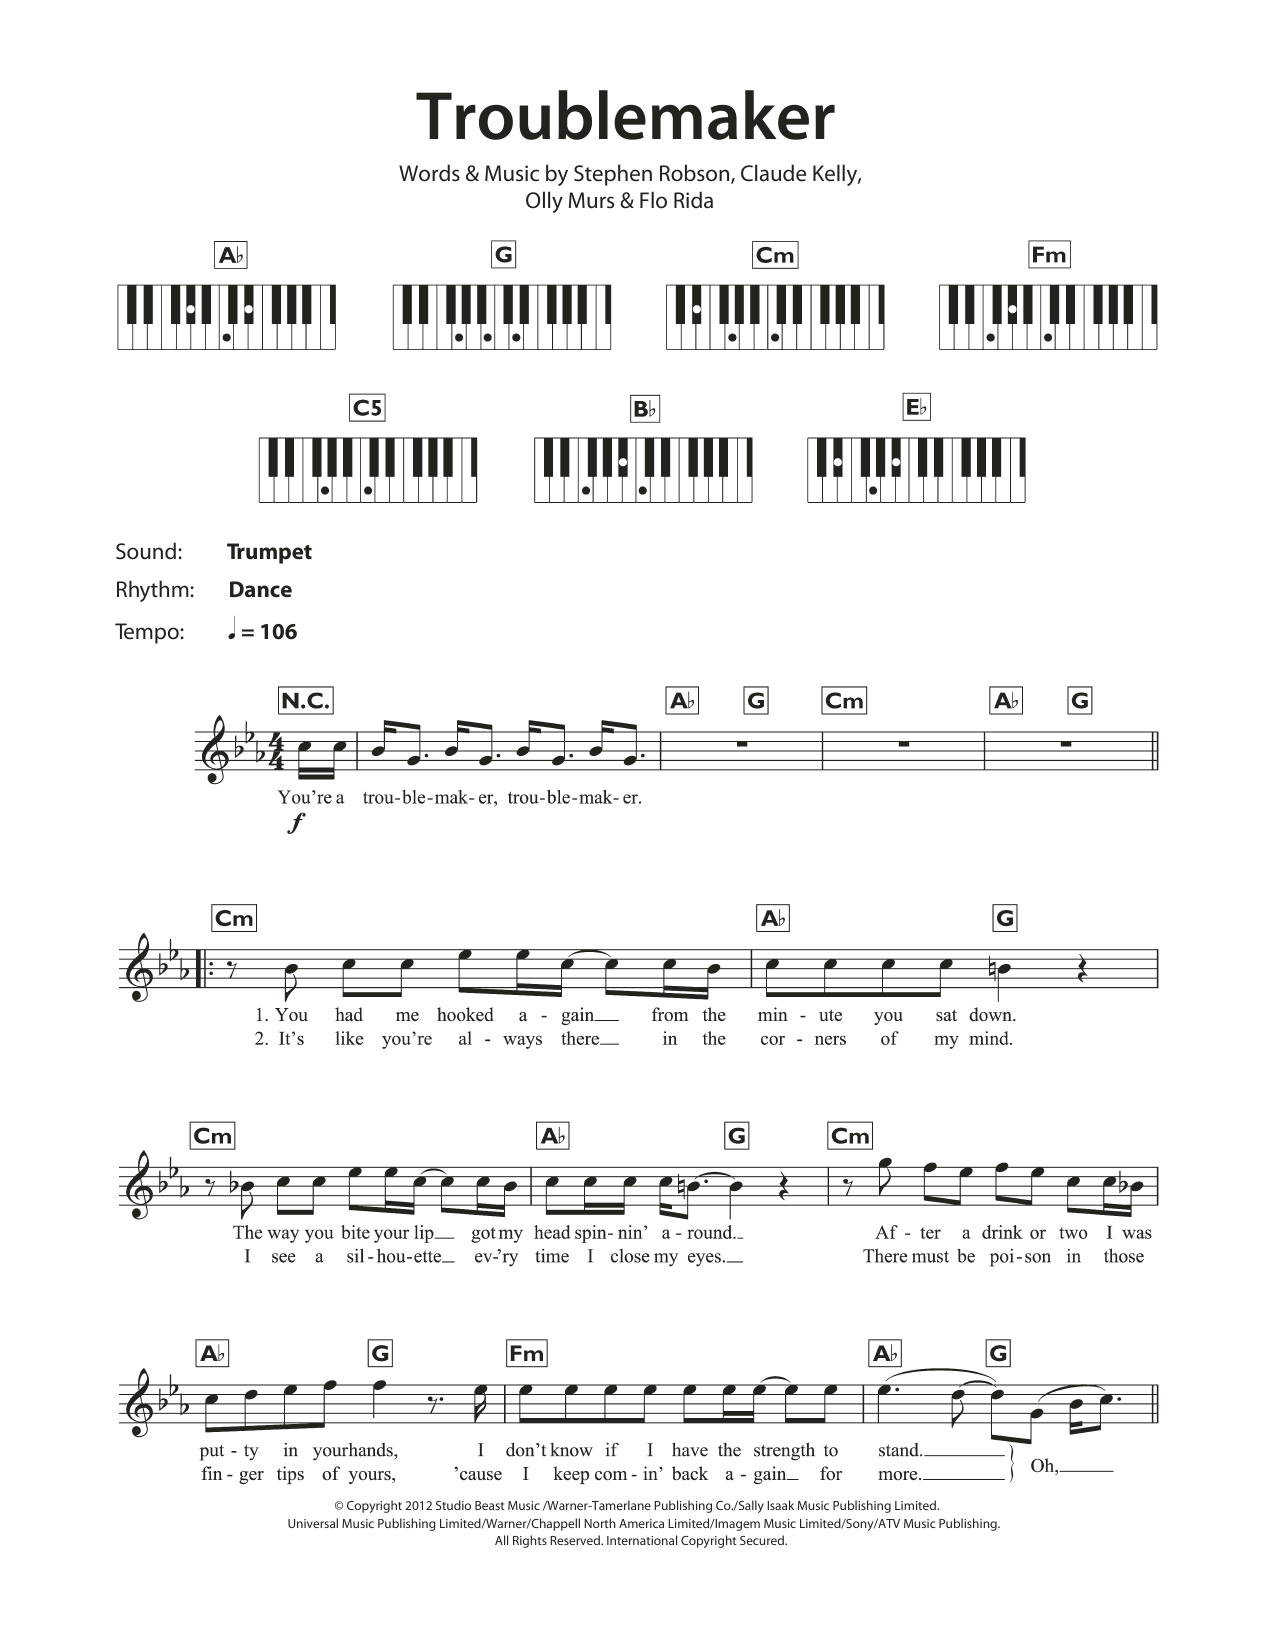 Download Olly Murs Troublemaker Sheet Music